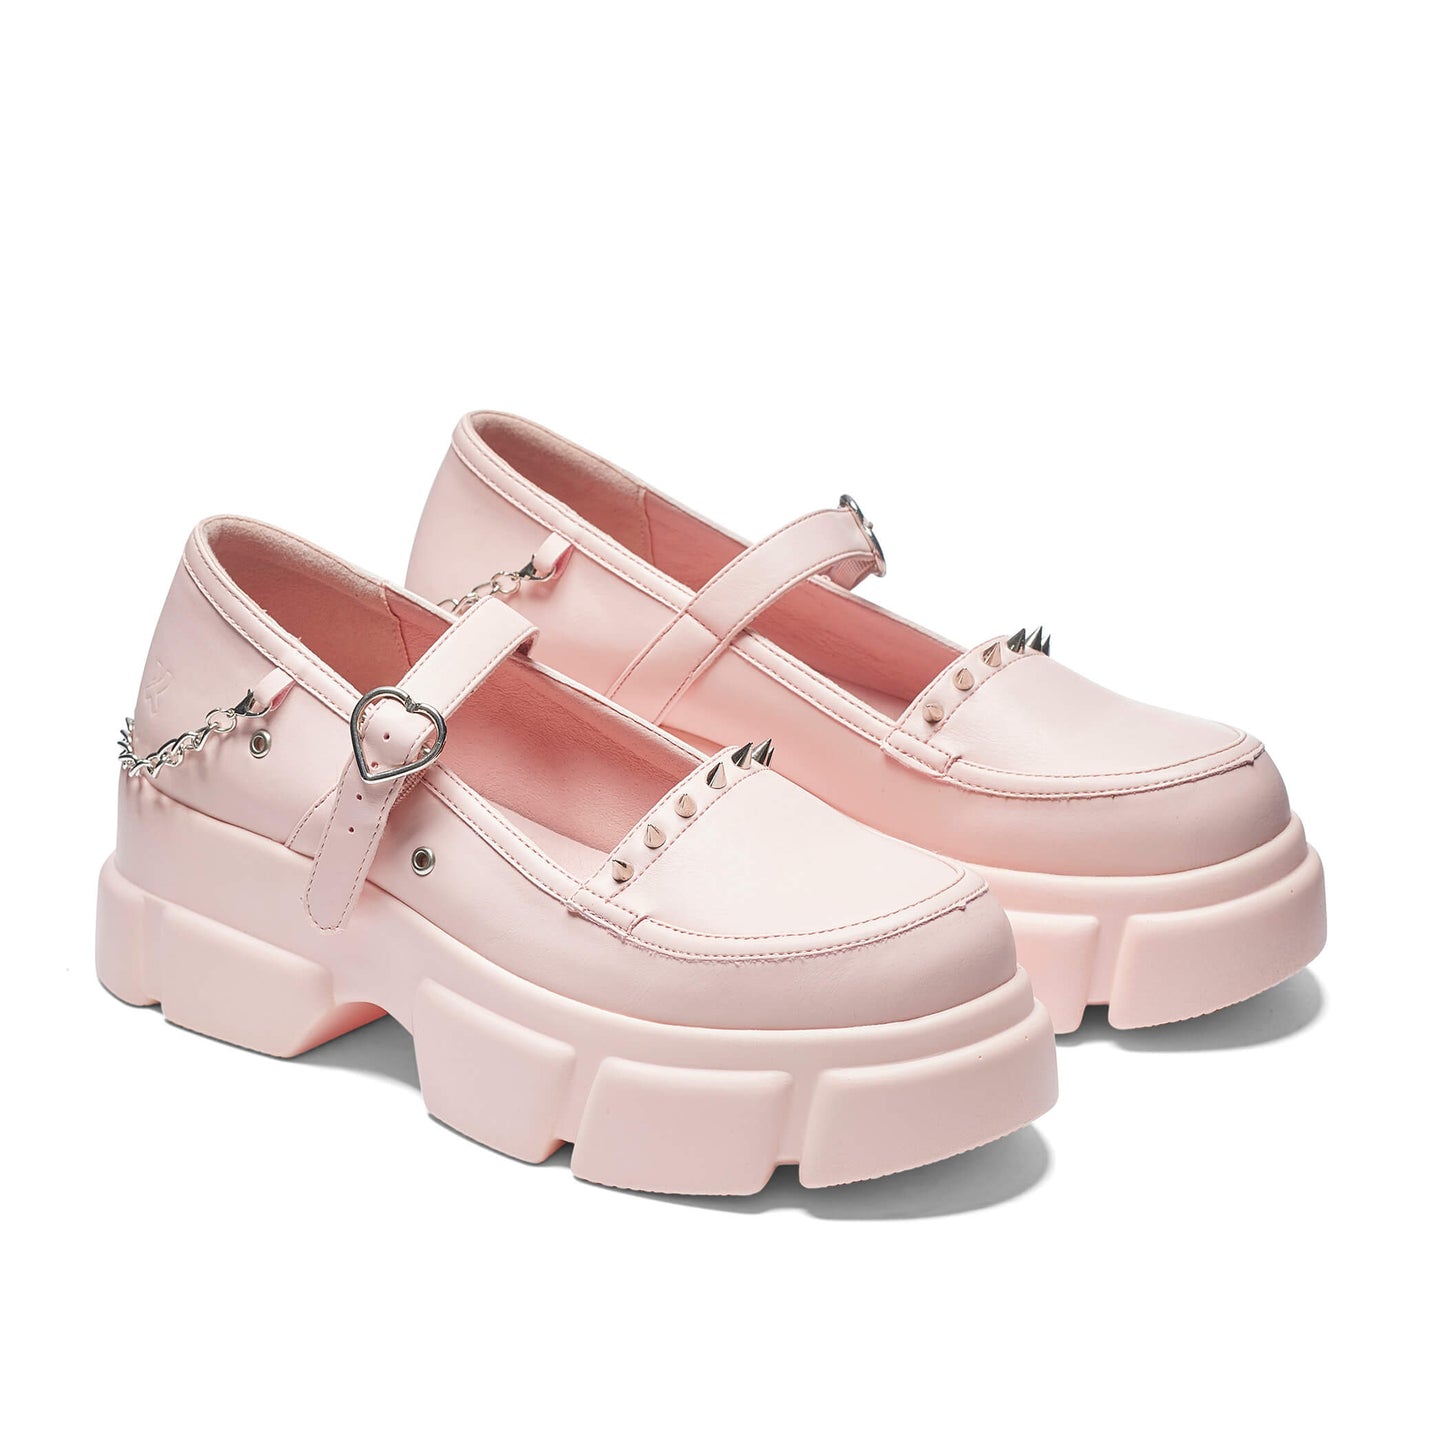 Cloud Mist Chunky Shoes - Baby Pink - Shoes - KOI Footwear - Pink - Three-Quarter View